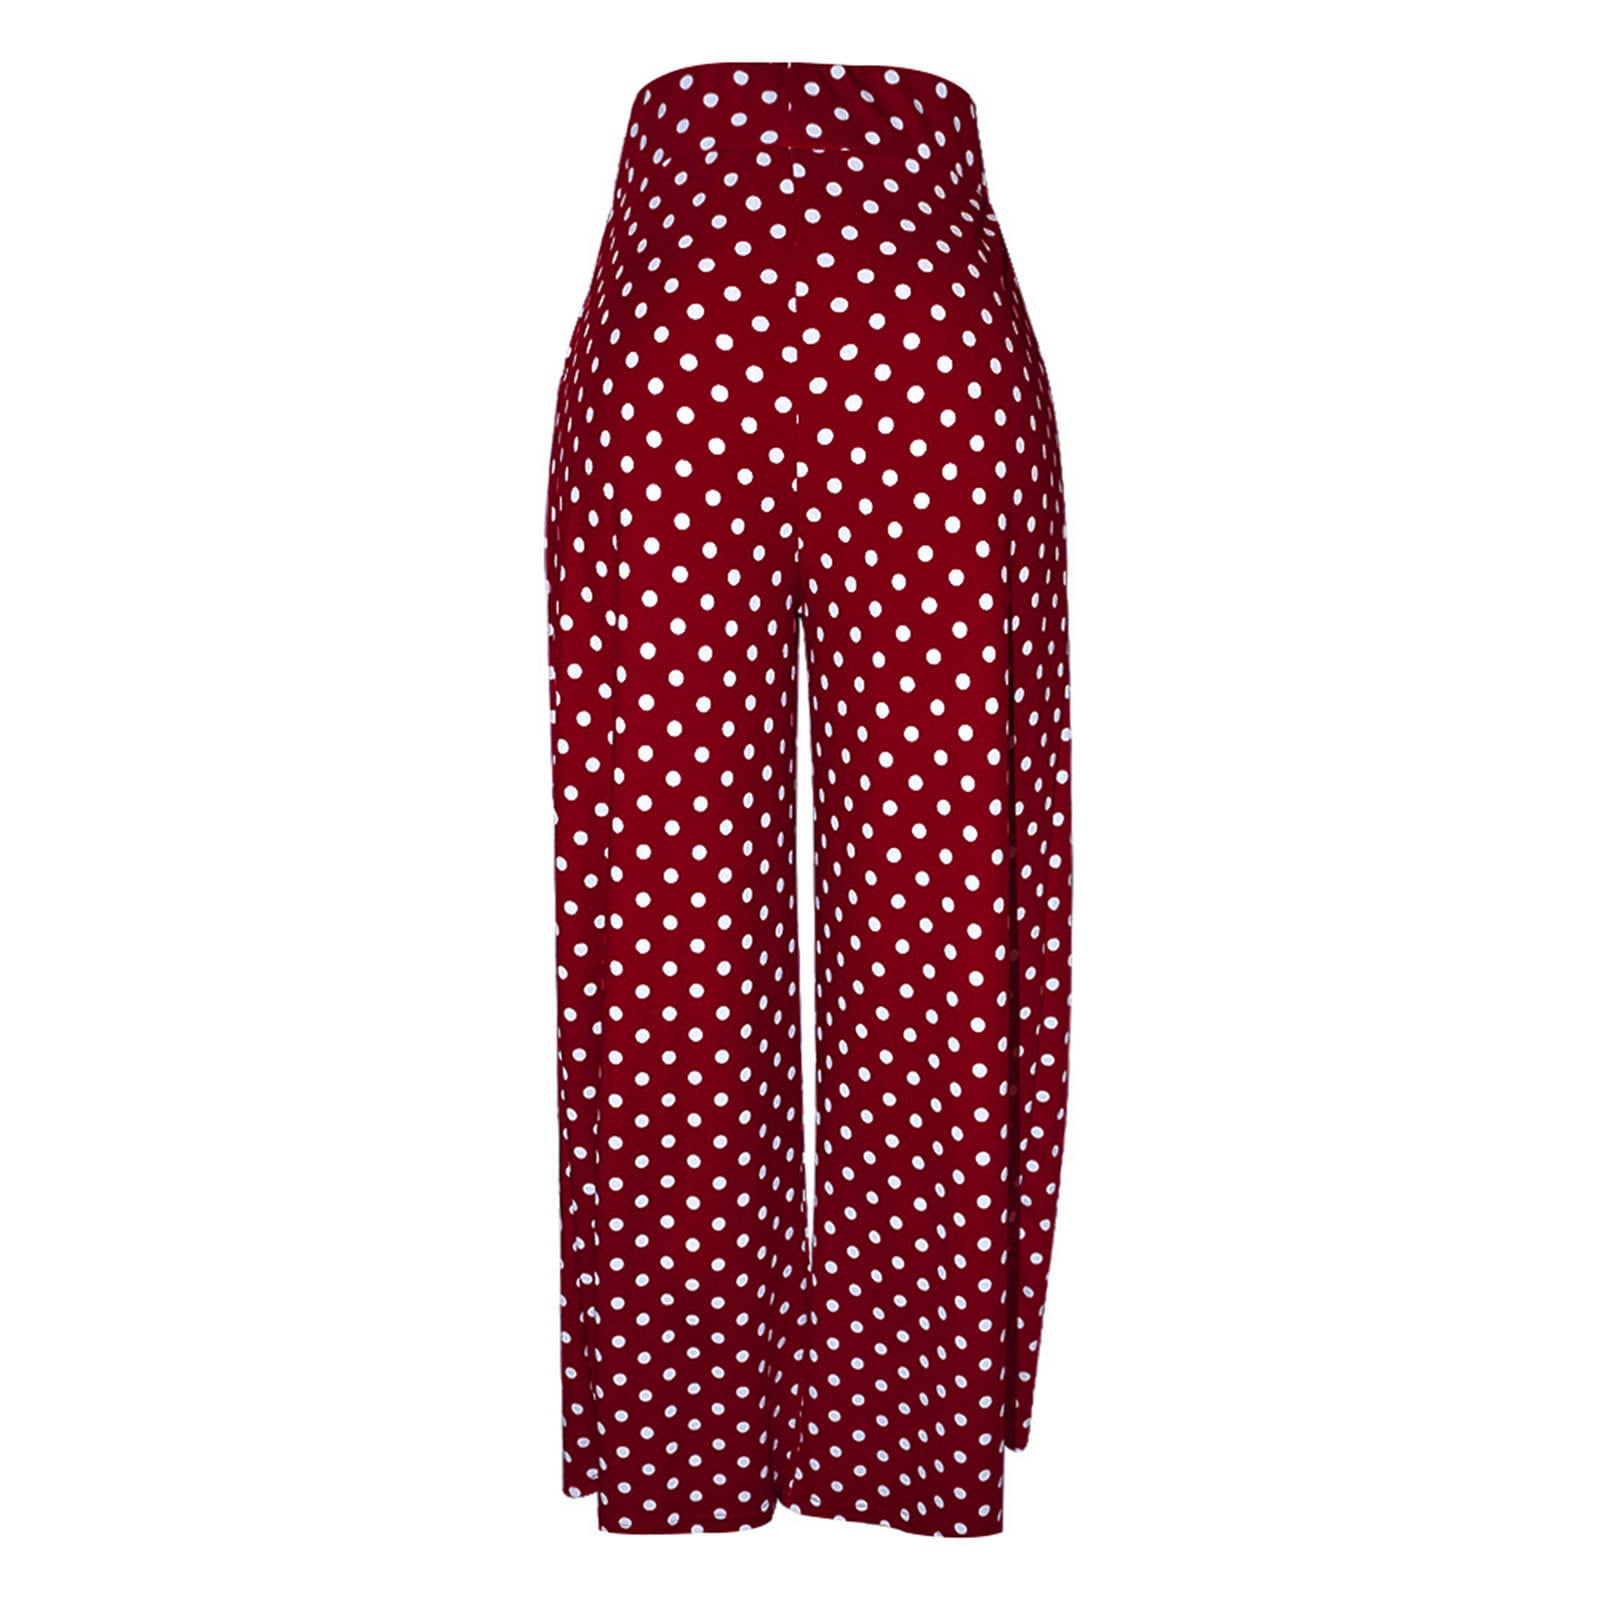 OYOANGLE Women's Plus Size Polka Dots High Waist Wide Leg Long Pants Casual Palazzo  Trousers Black and White 1XL at  Women's Clothing store